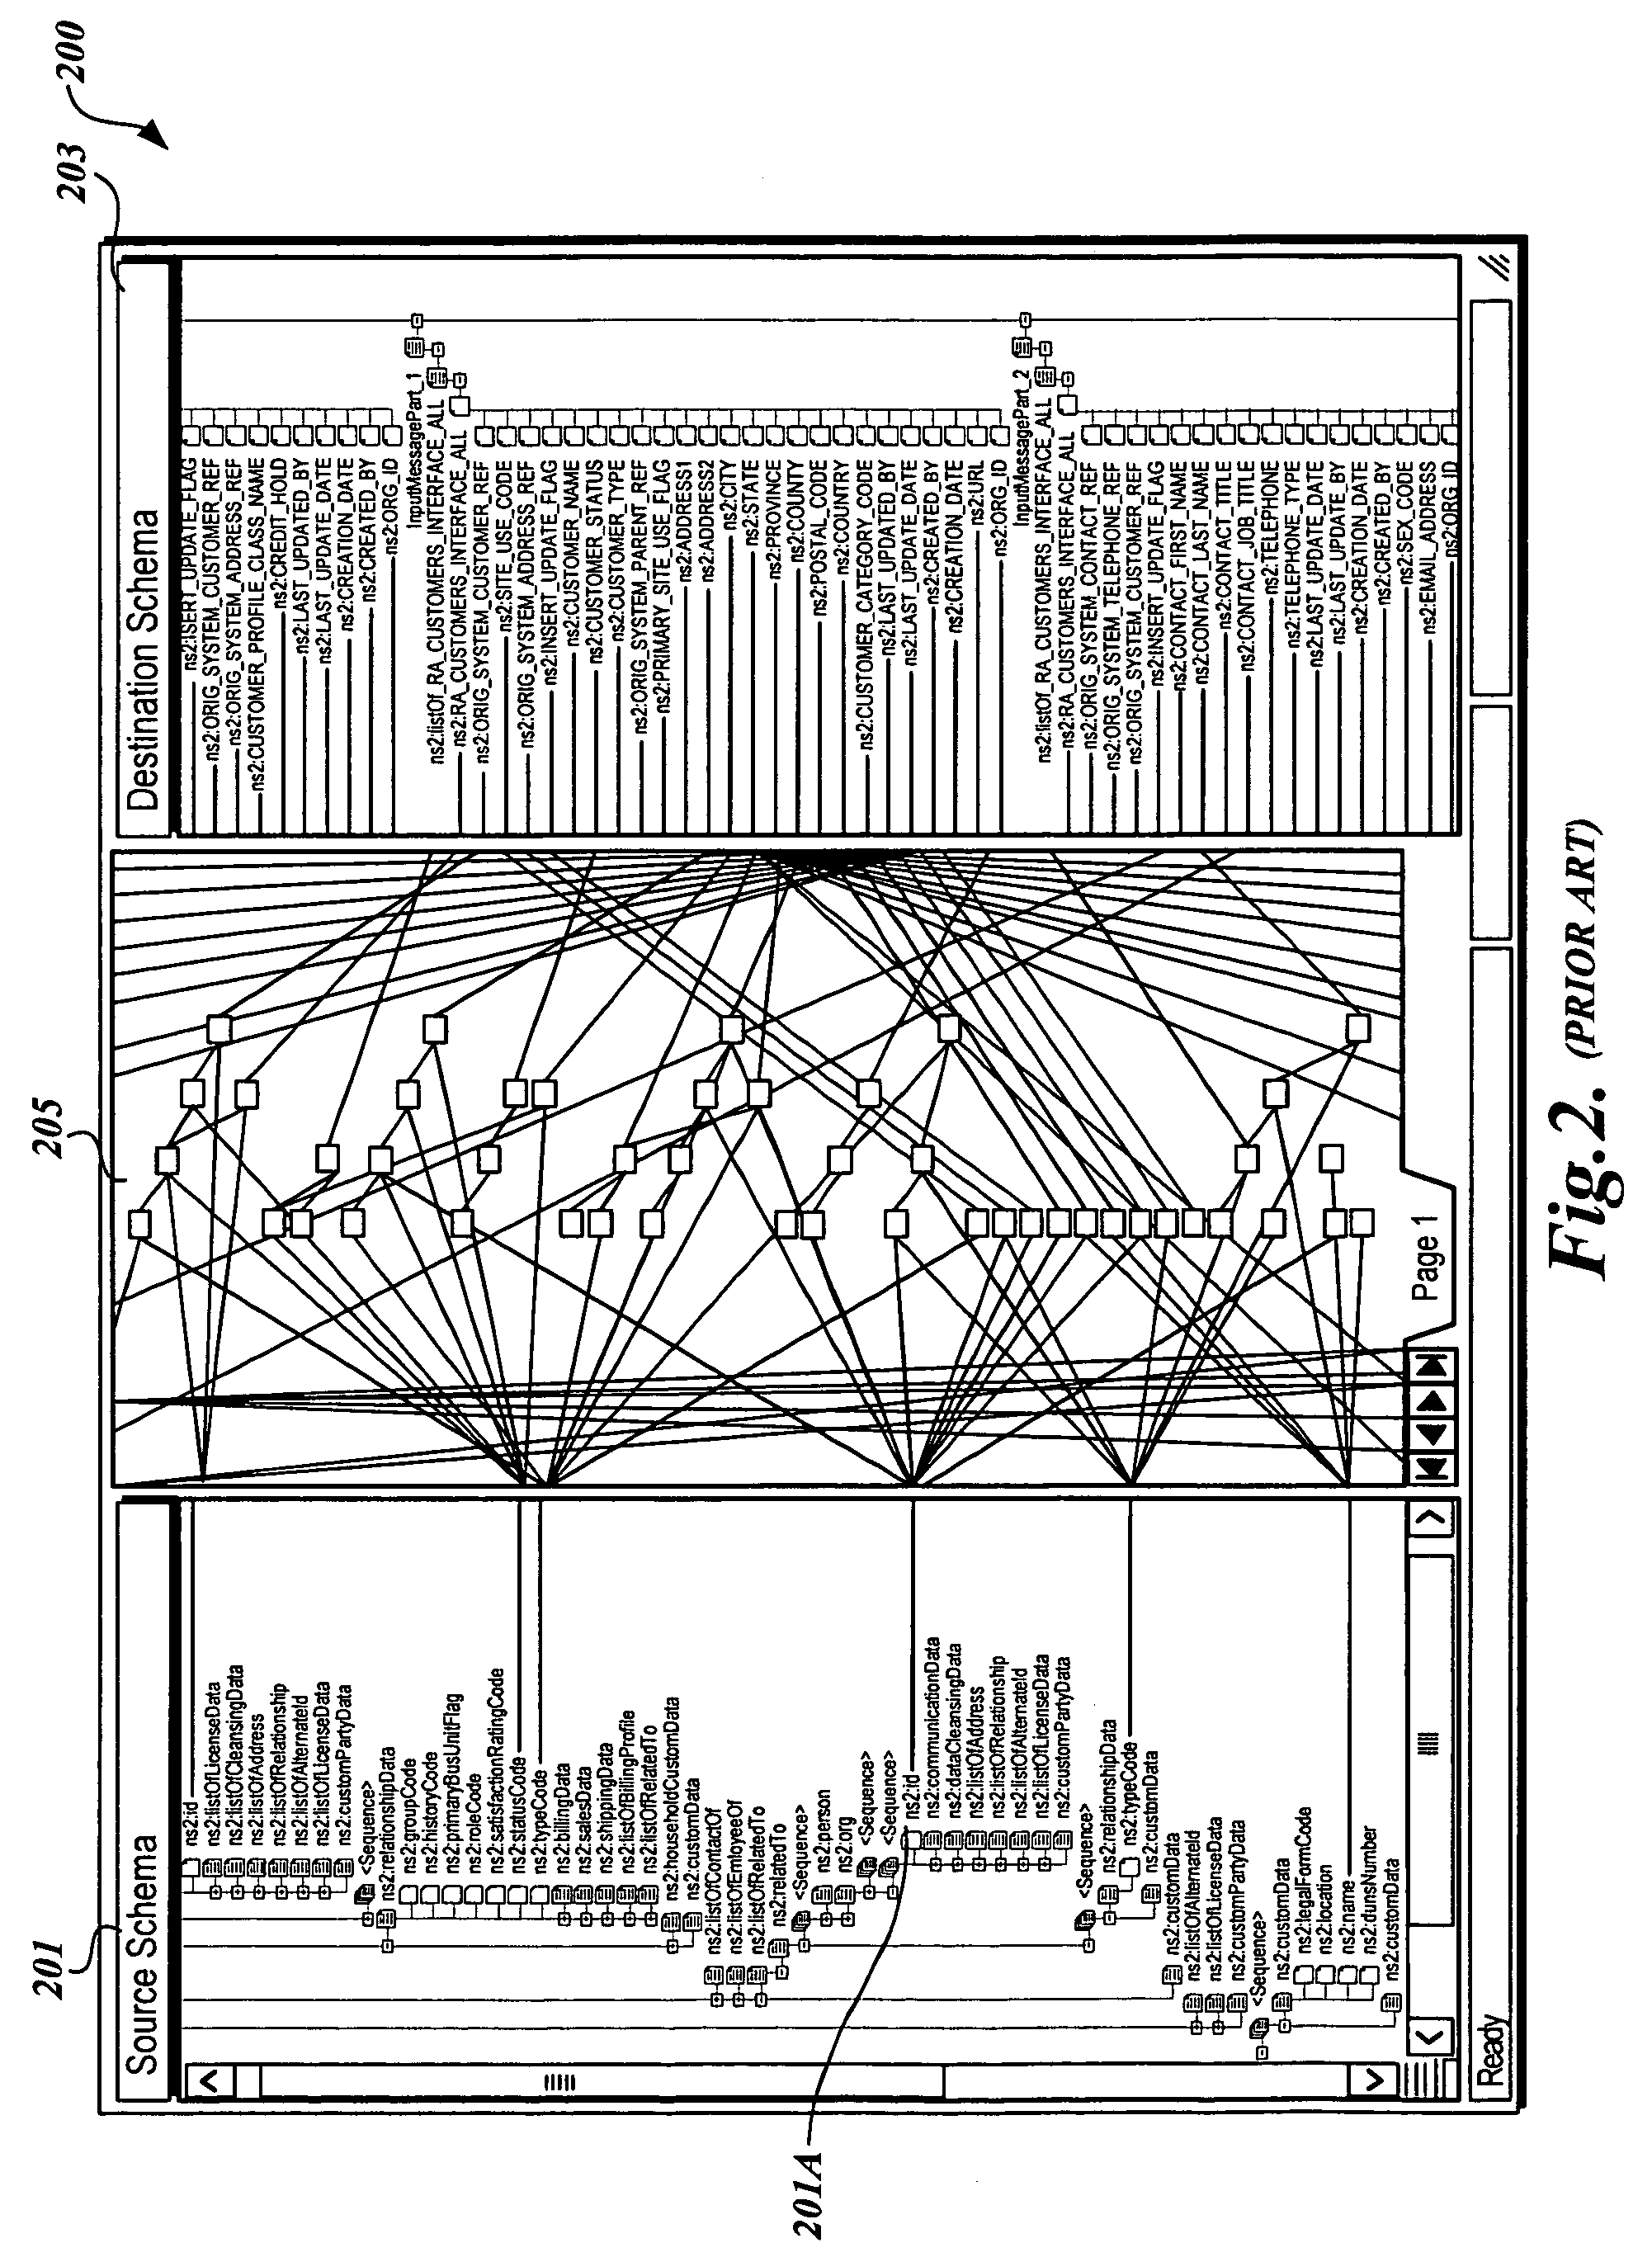 Method for displaying a visual representation of mapping between a source schema and a destination schema emphasizing visually adjusts the objects such that they are visually distinguishable from the non-relevant and non-selected objects